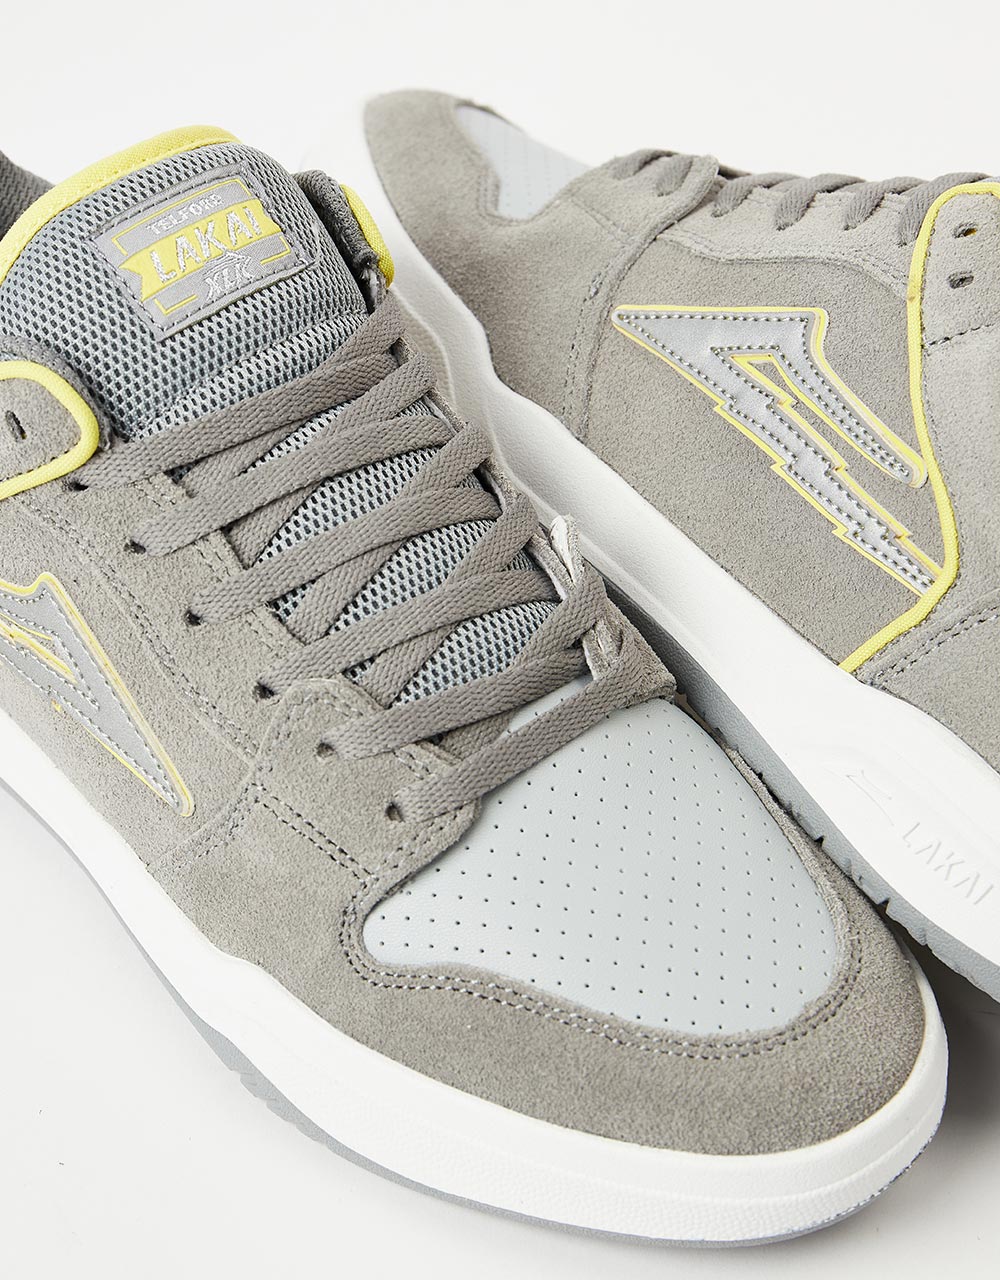 Lakai Telford Low Skate Shoes - Grey/Reflective Suede